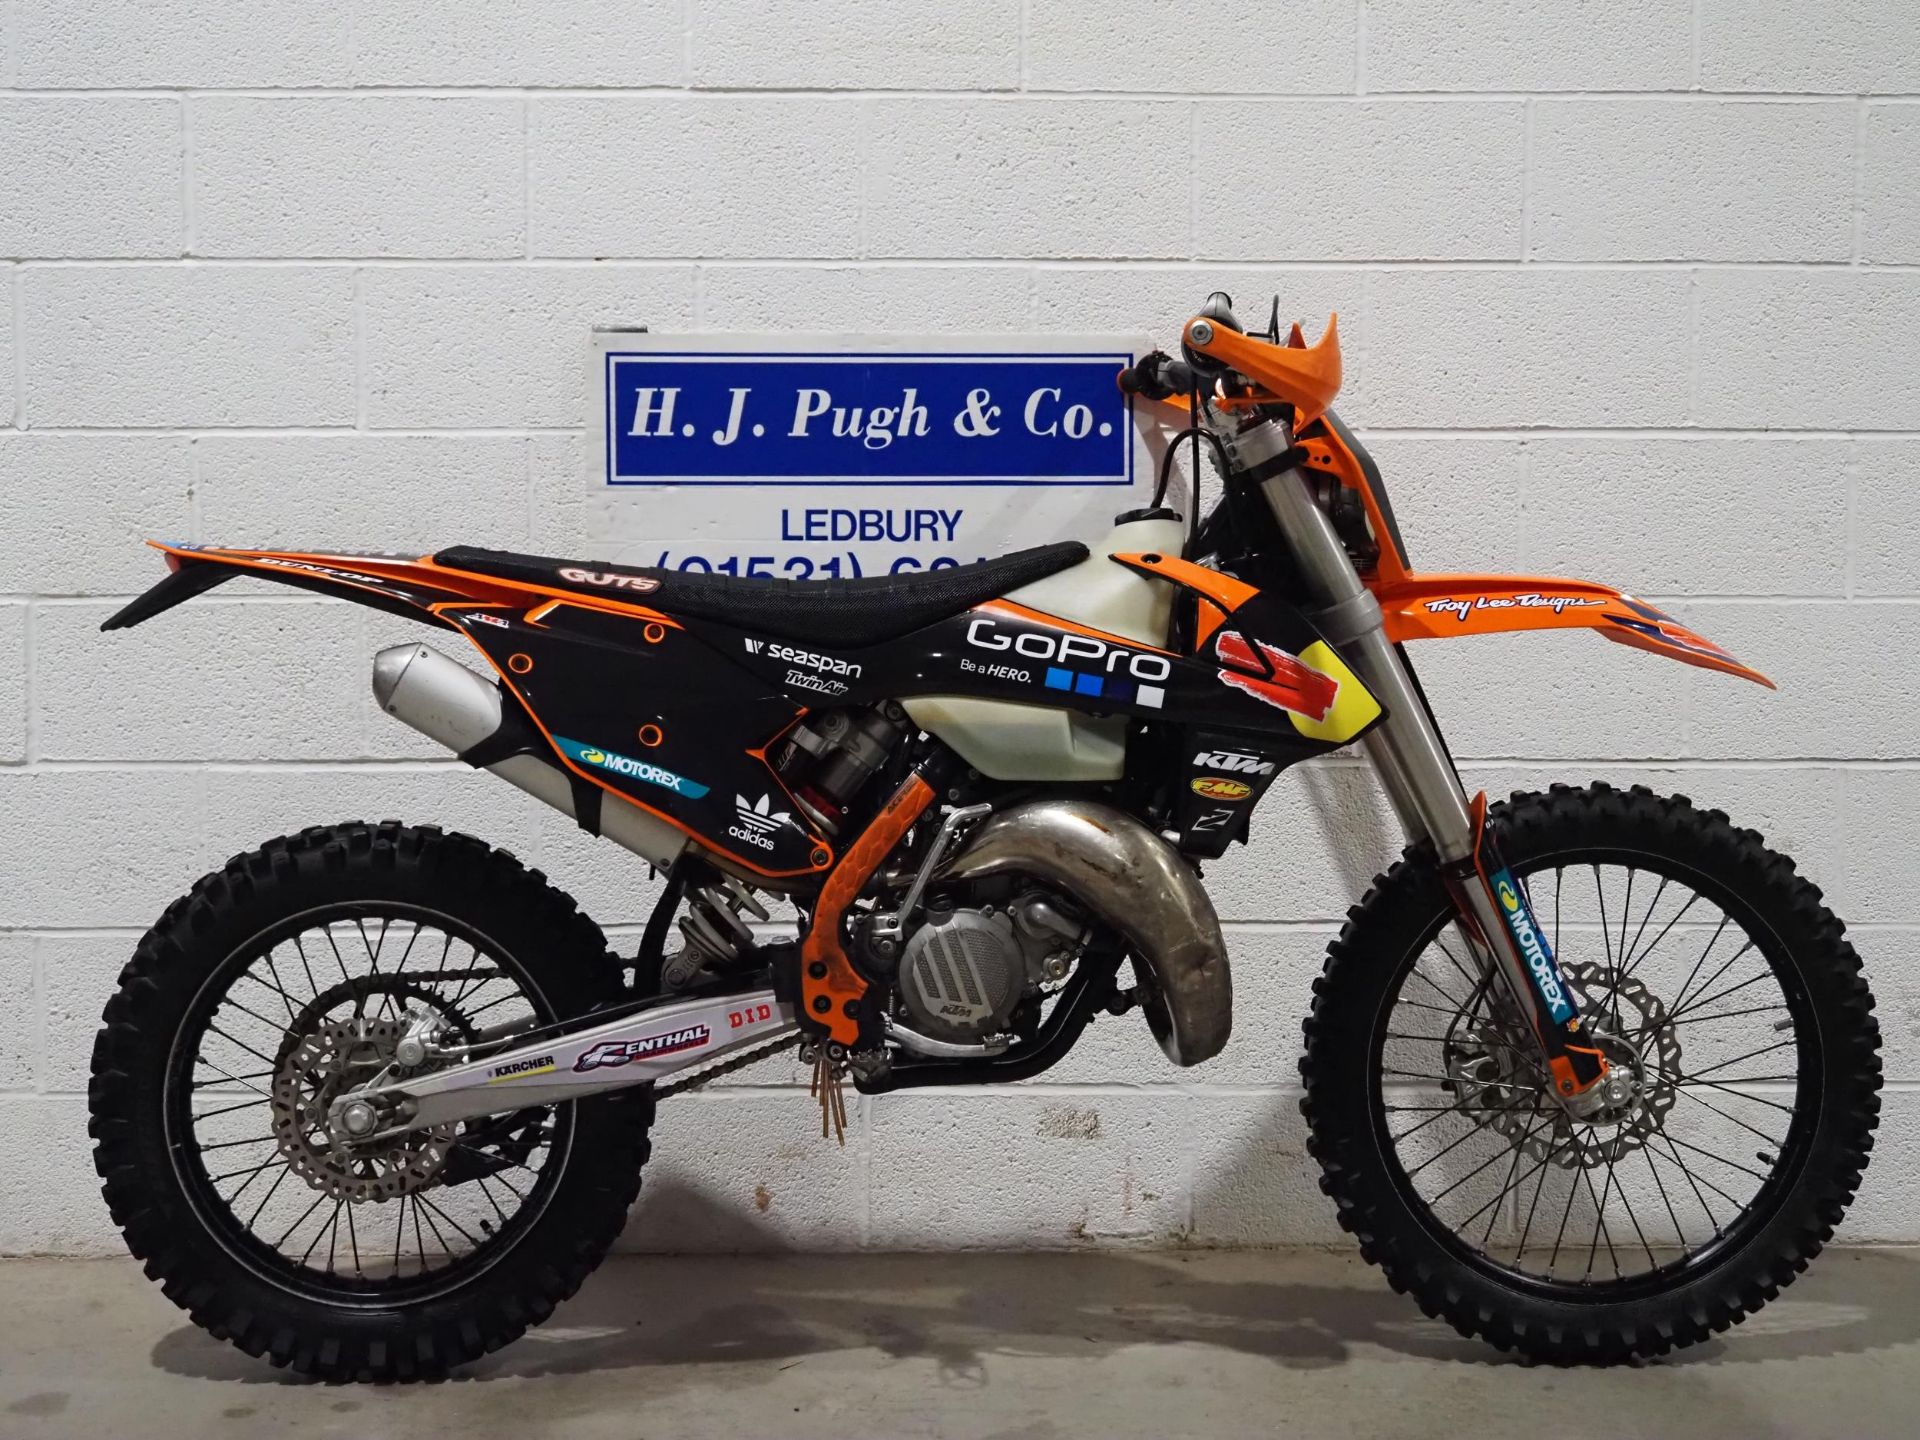 KTM motorcross bike. 2017. Runs and rides. Recent plastics and graphics fitted aswell as clutch